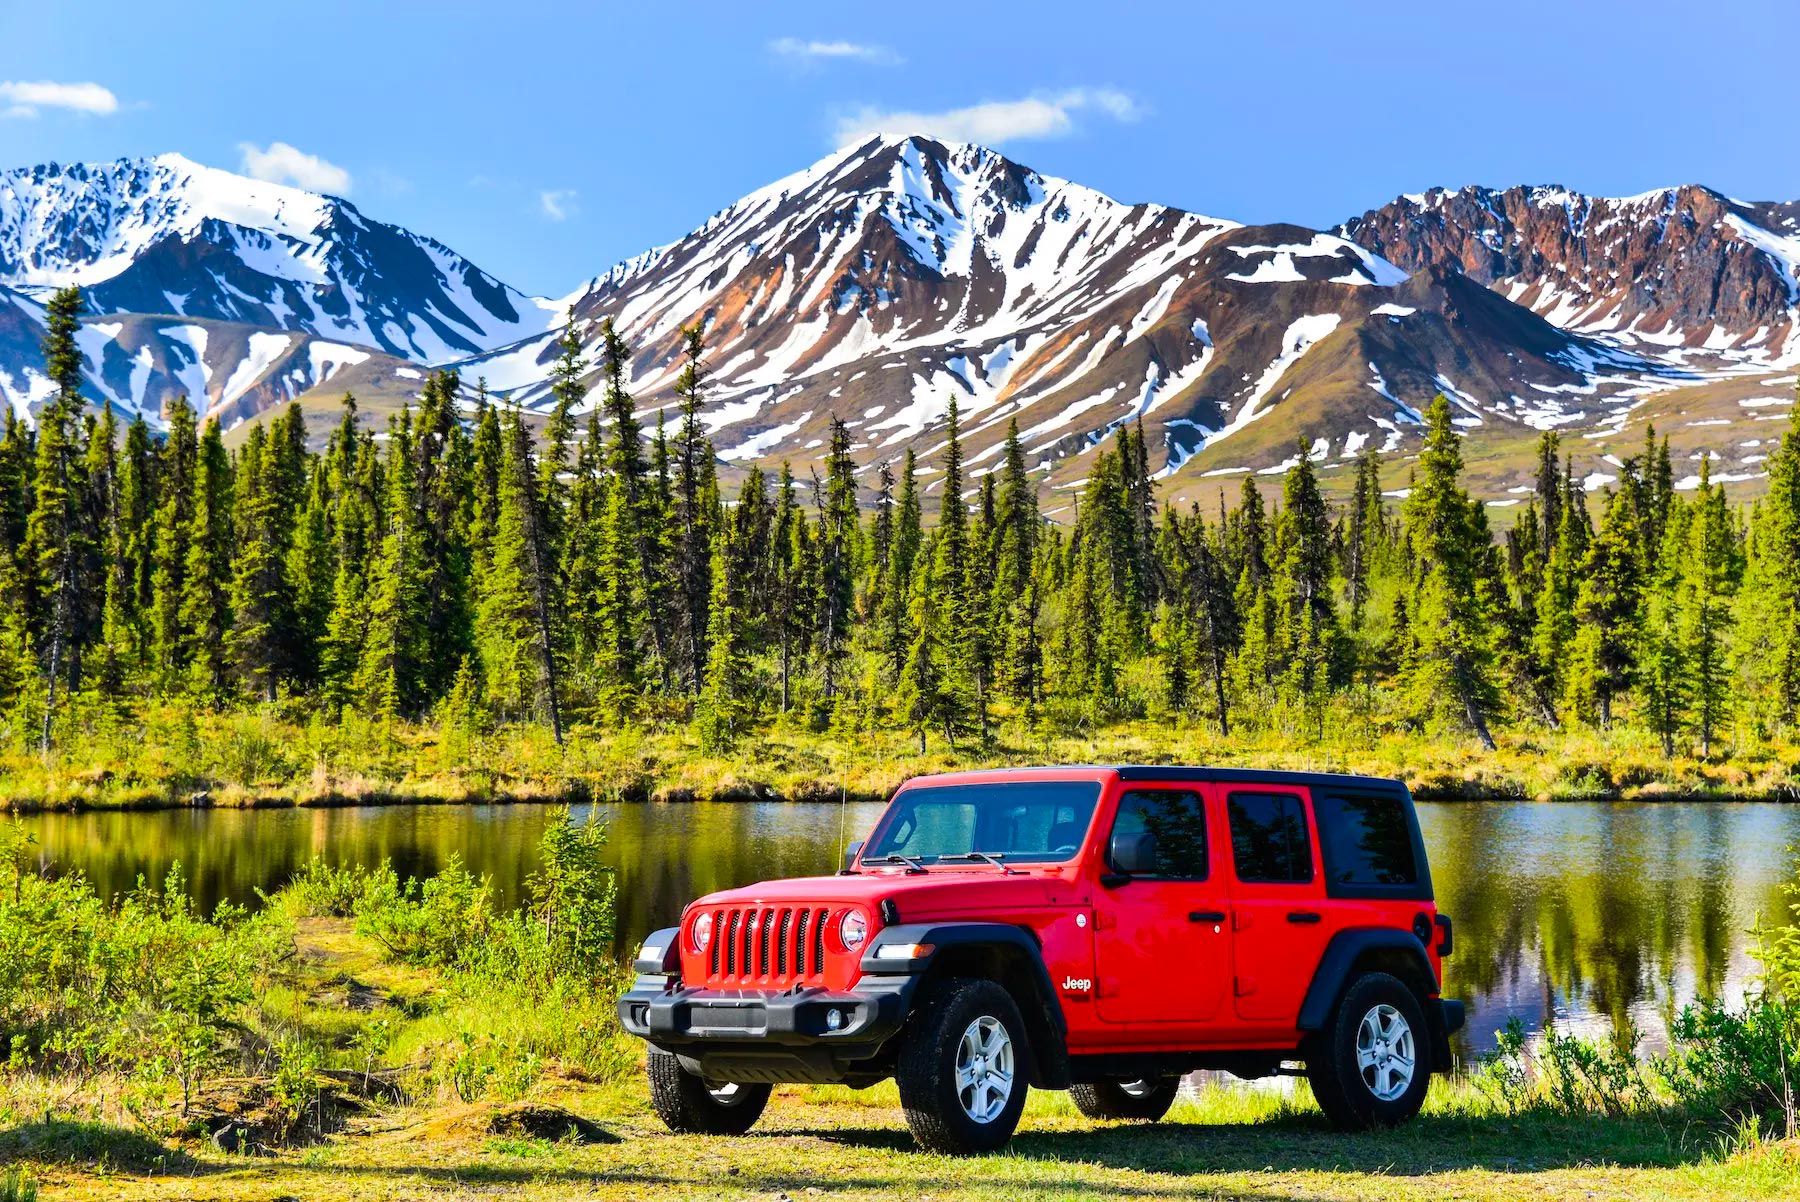 jeep tours in denali national park